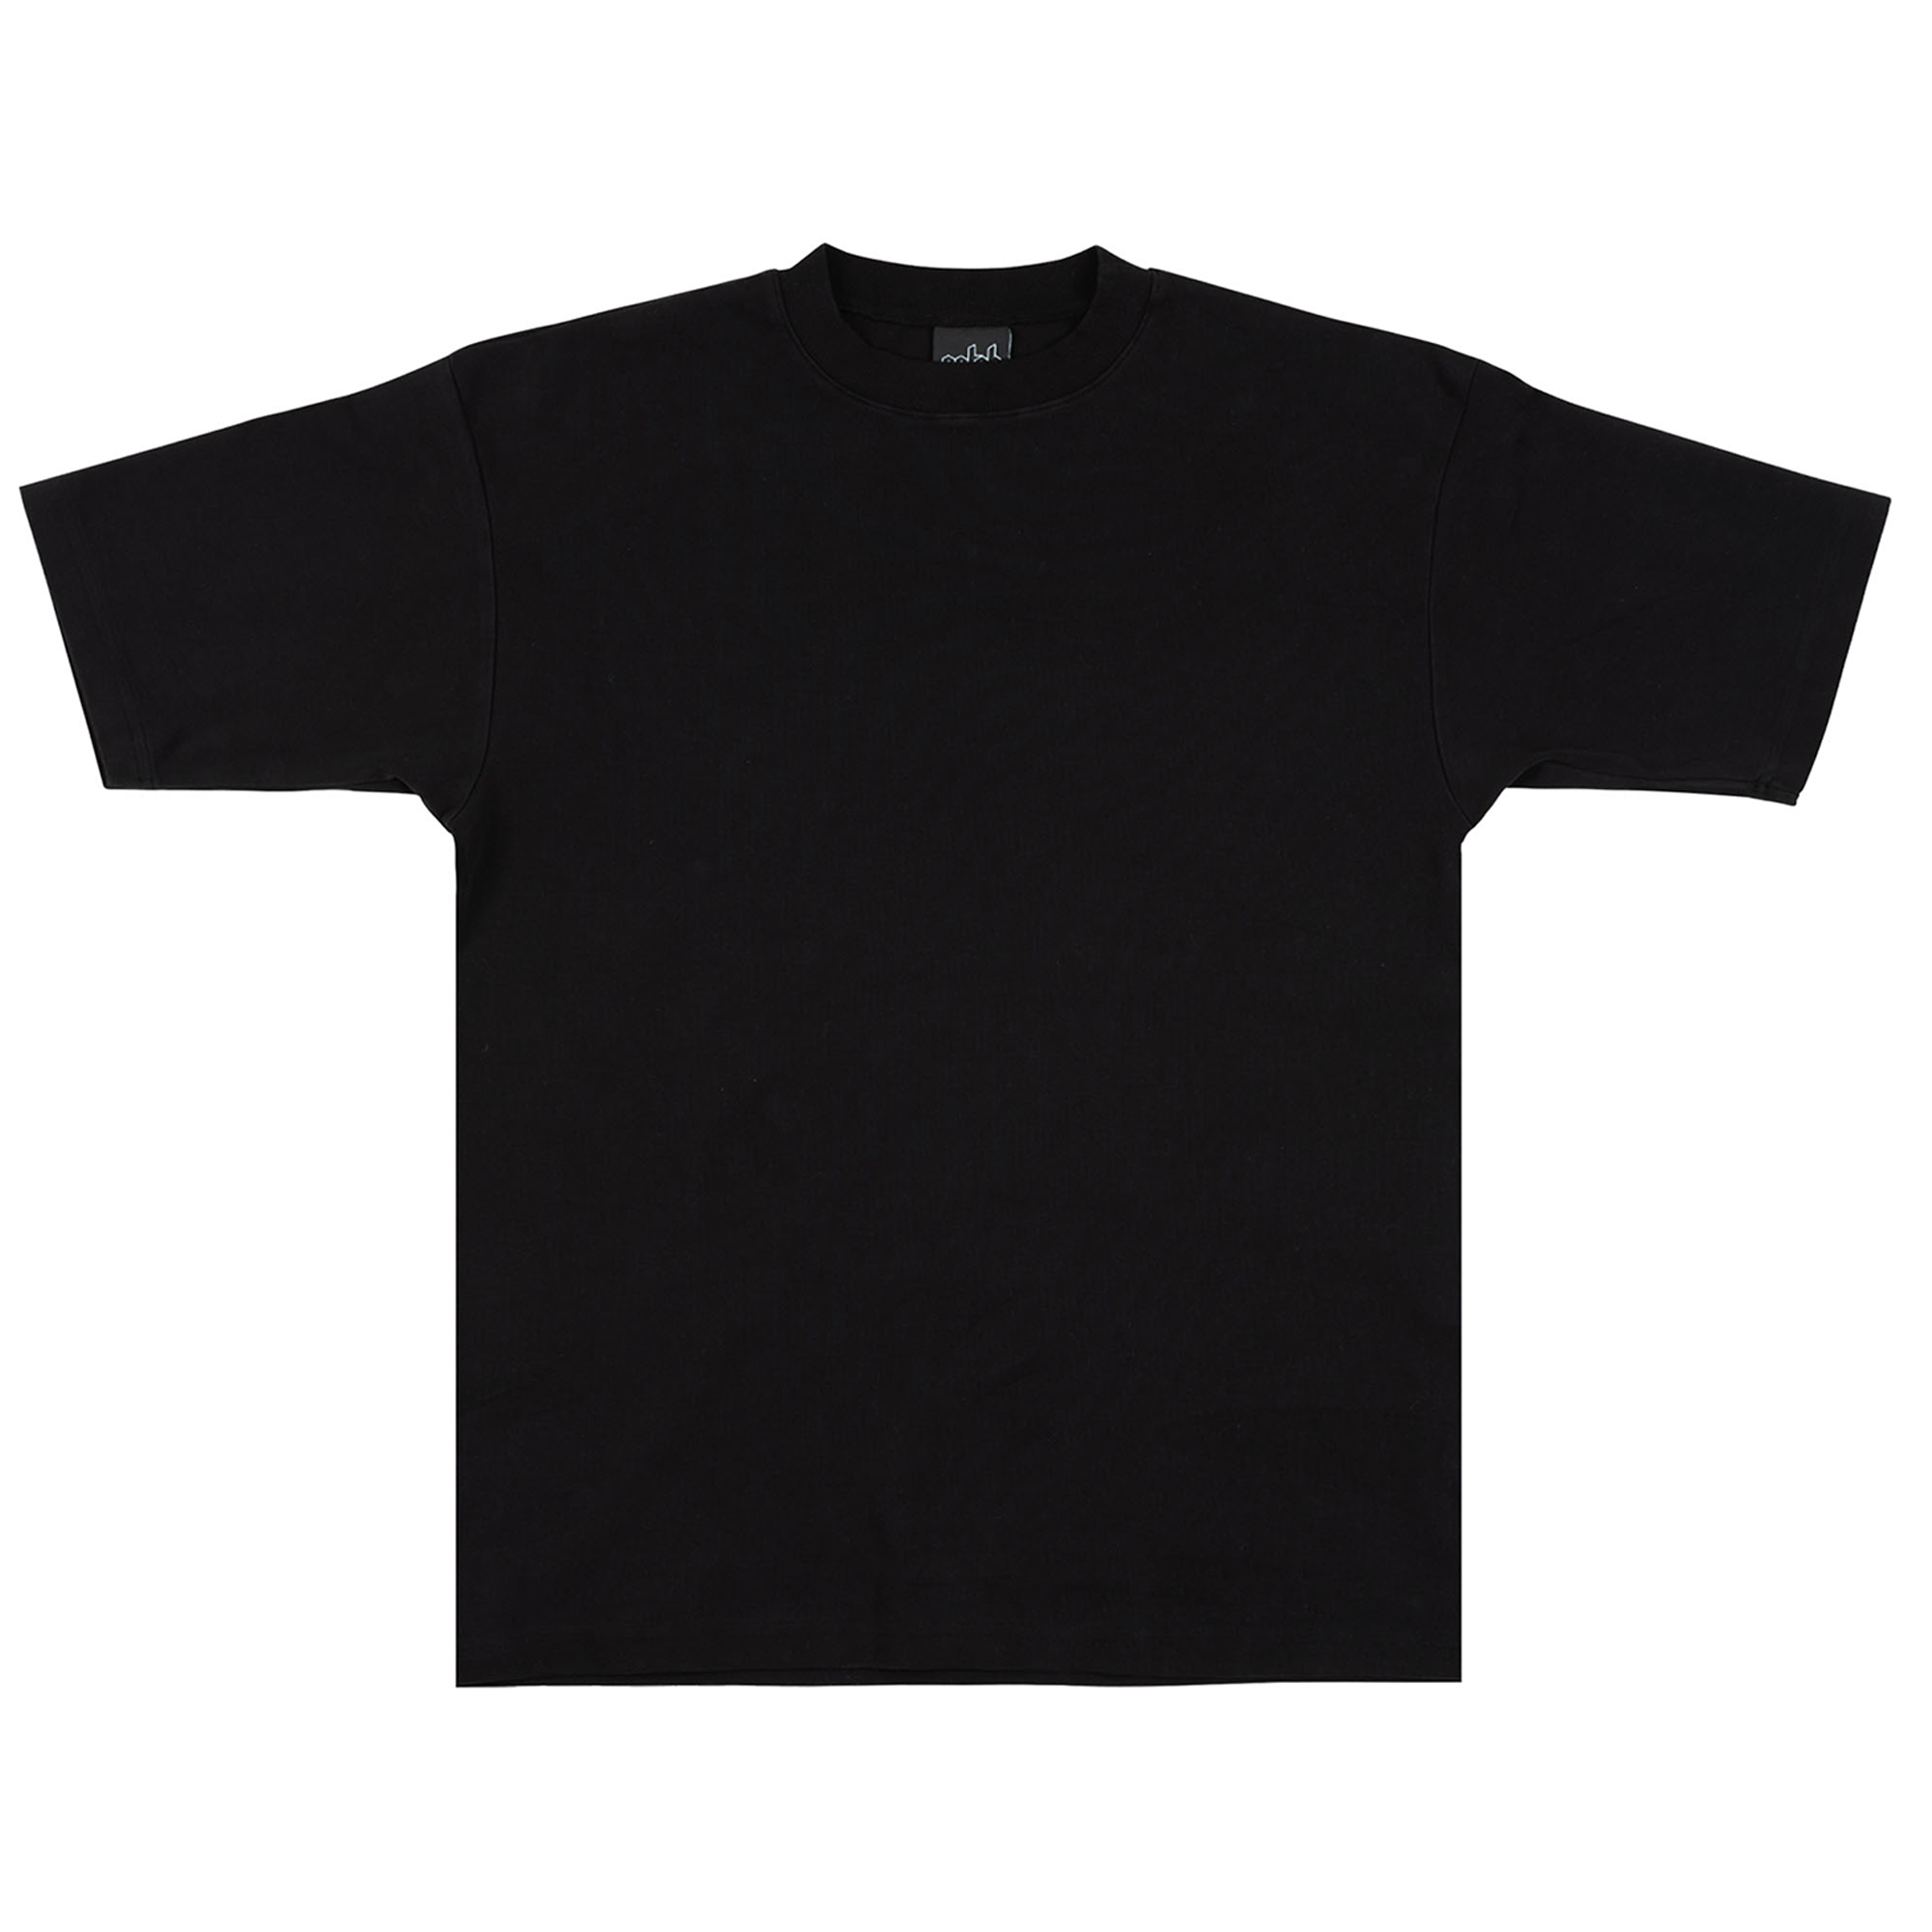 Front View of the Black Patch Distortion T-shirt